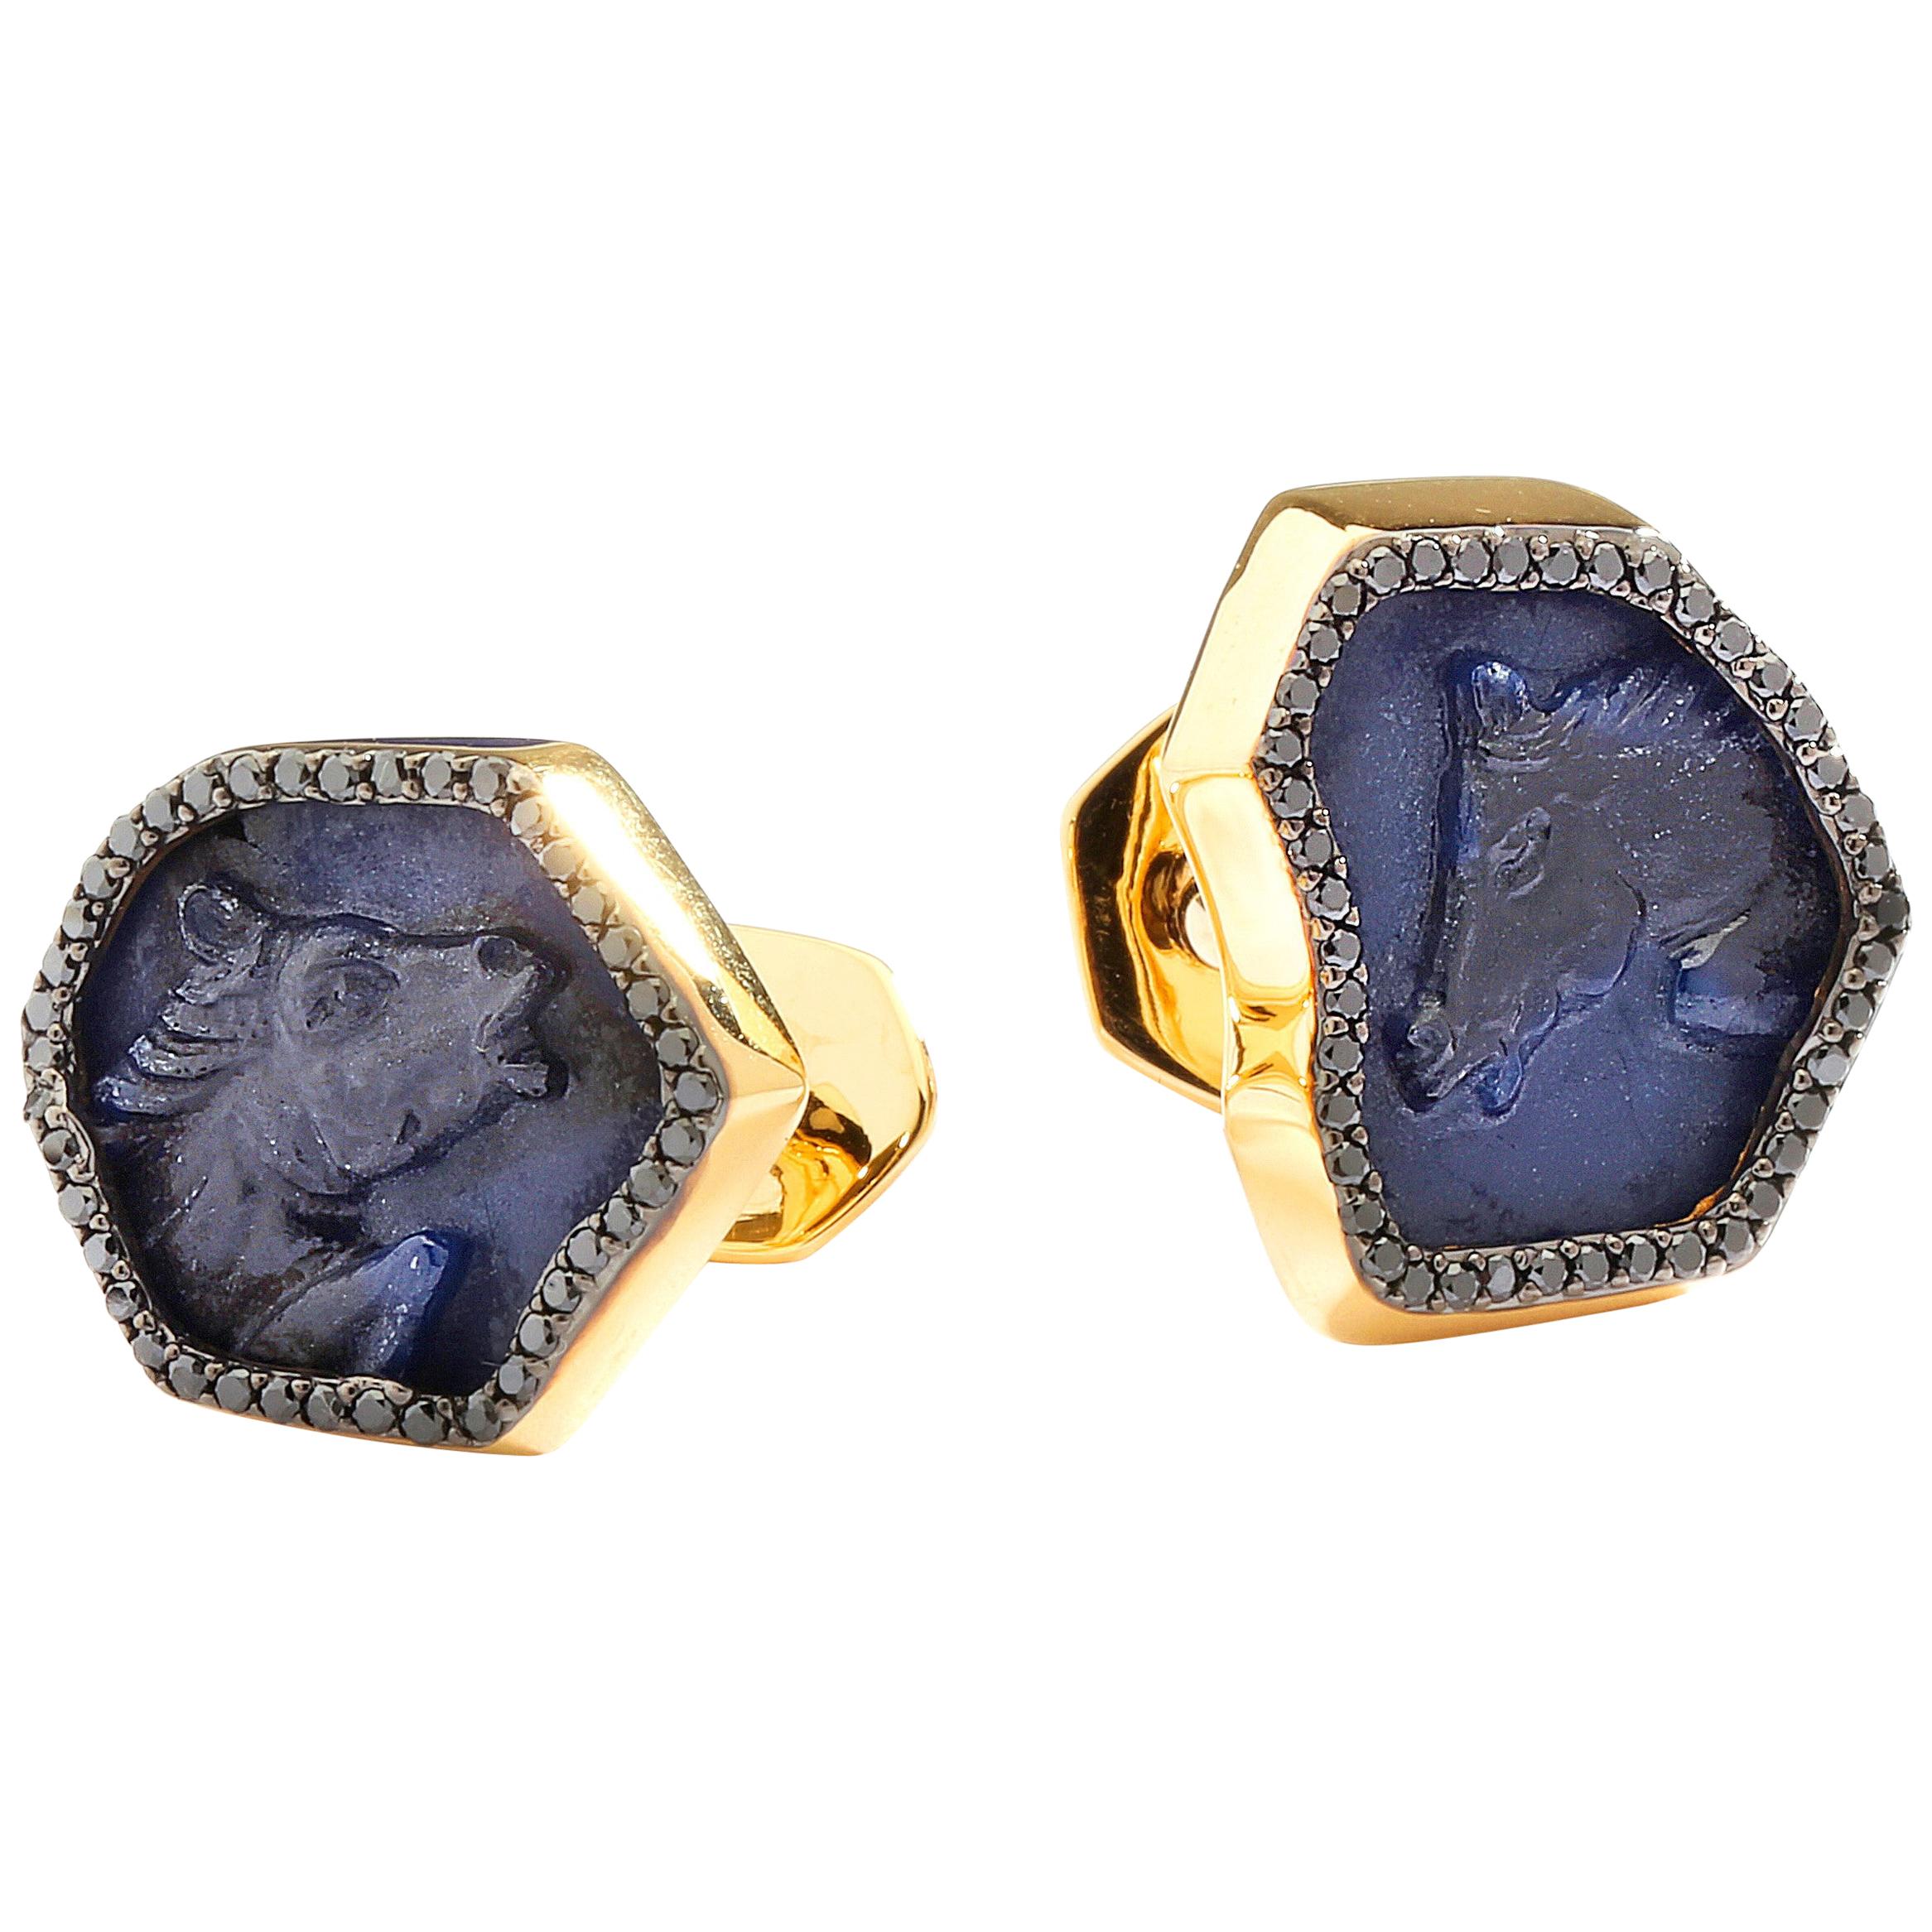 Syna Hand Carved Blue Sapphire Horse Yellow Gold Cuff Links with Black Diamonds